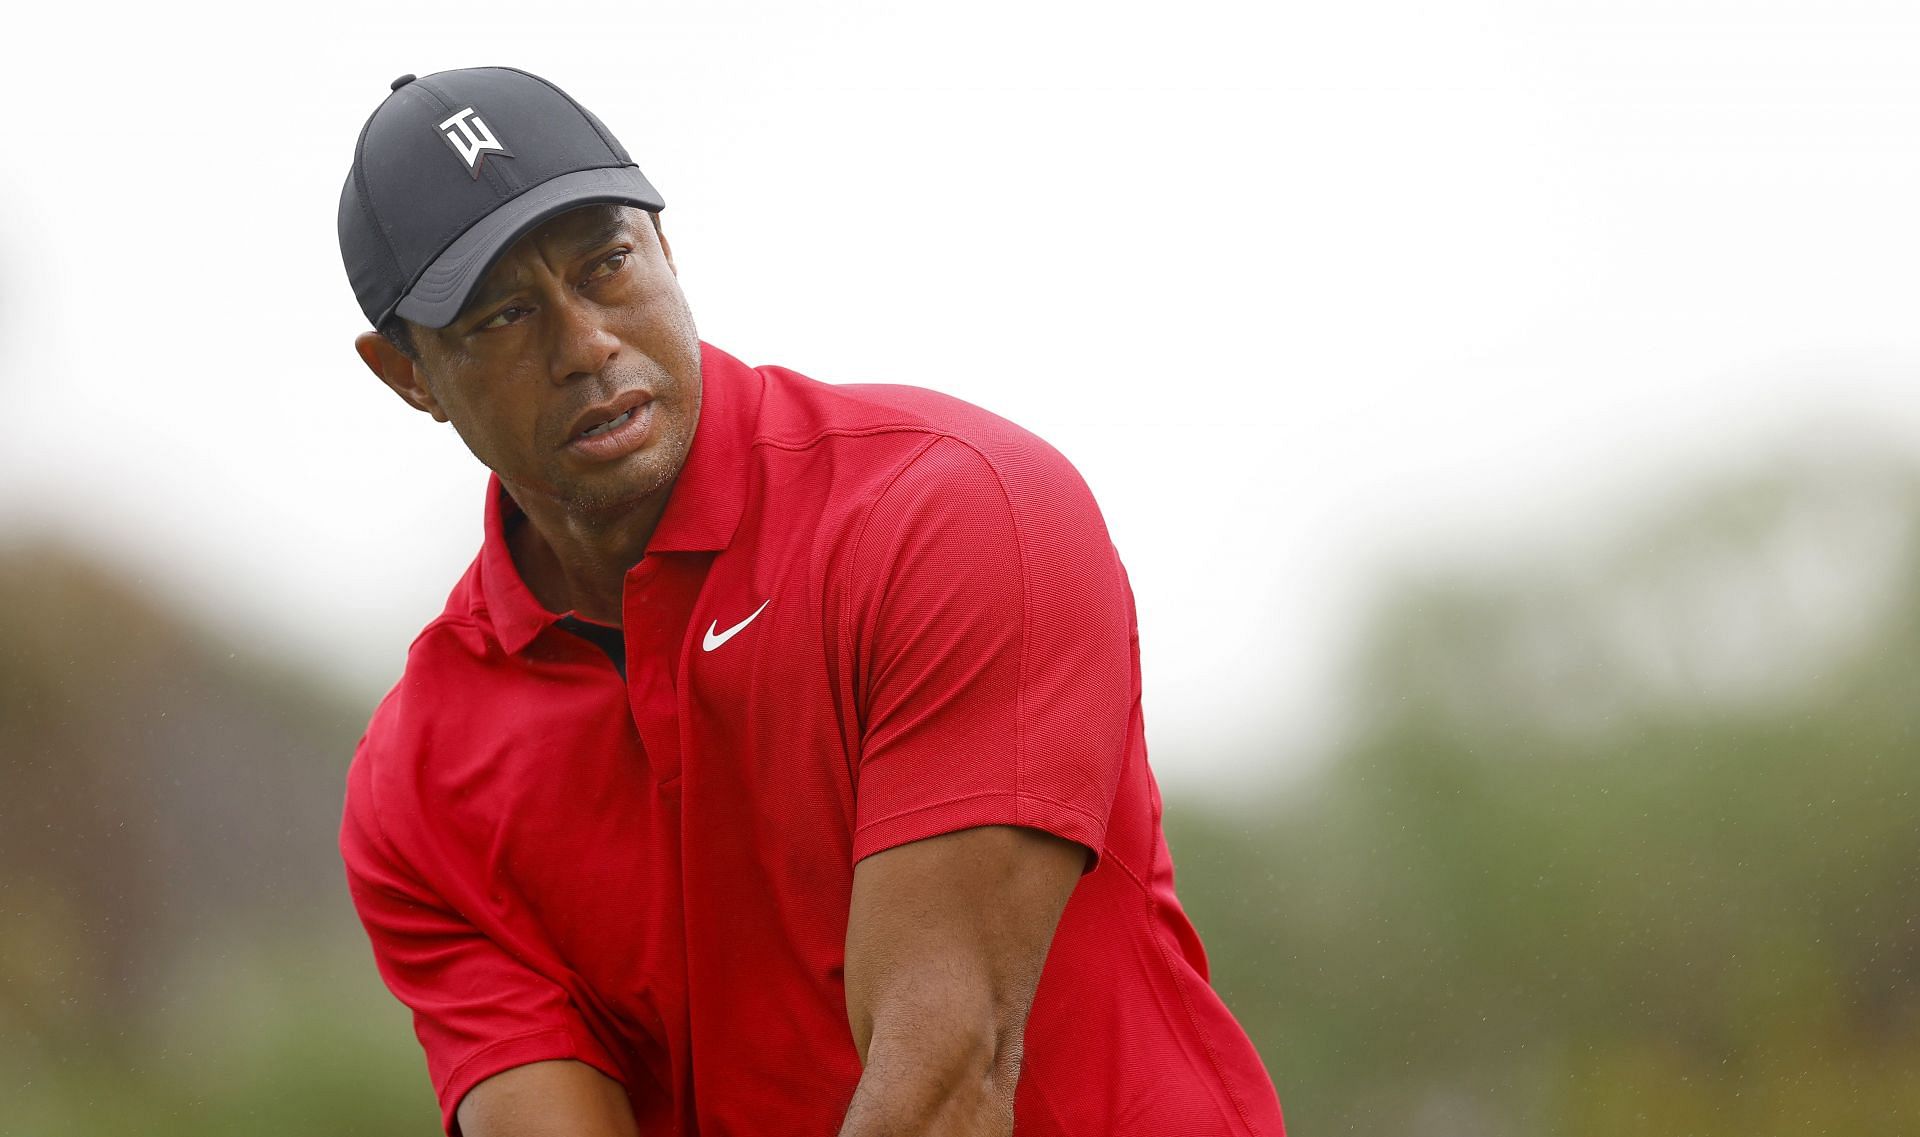 Tiger Woods PNC Championship - Final Round (Image via Getty)